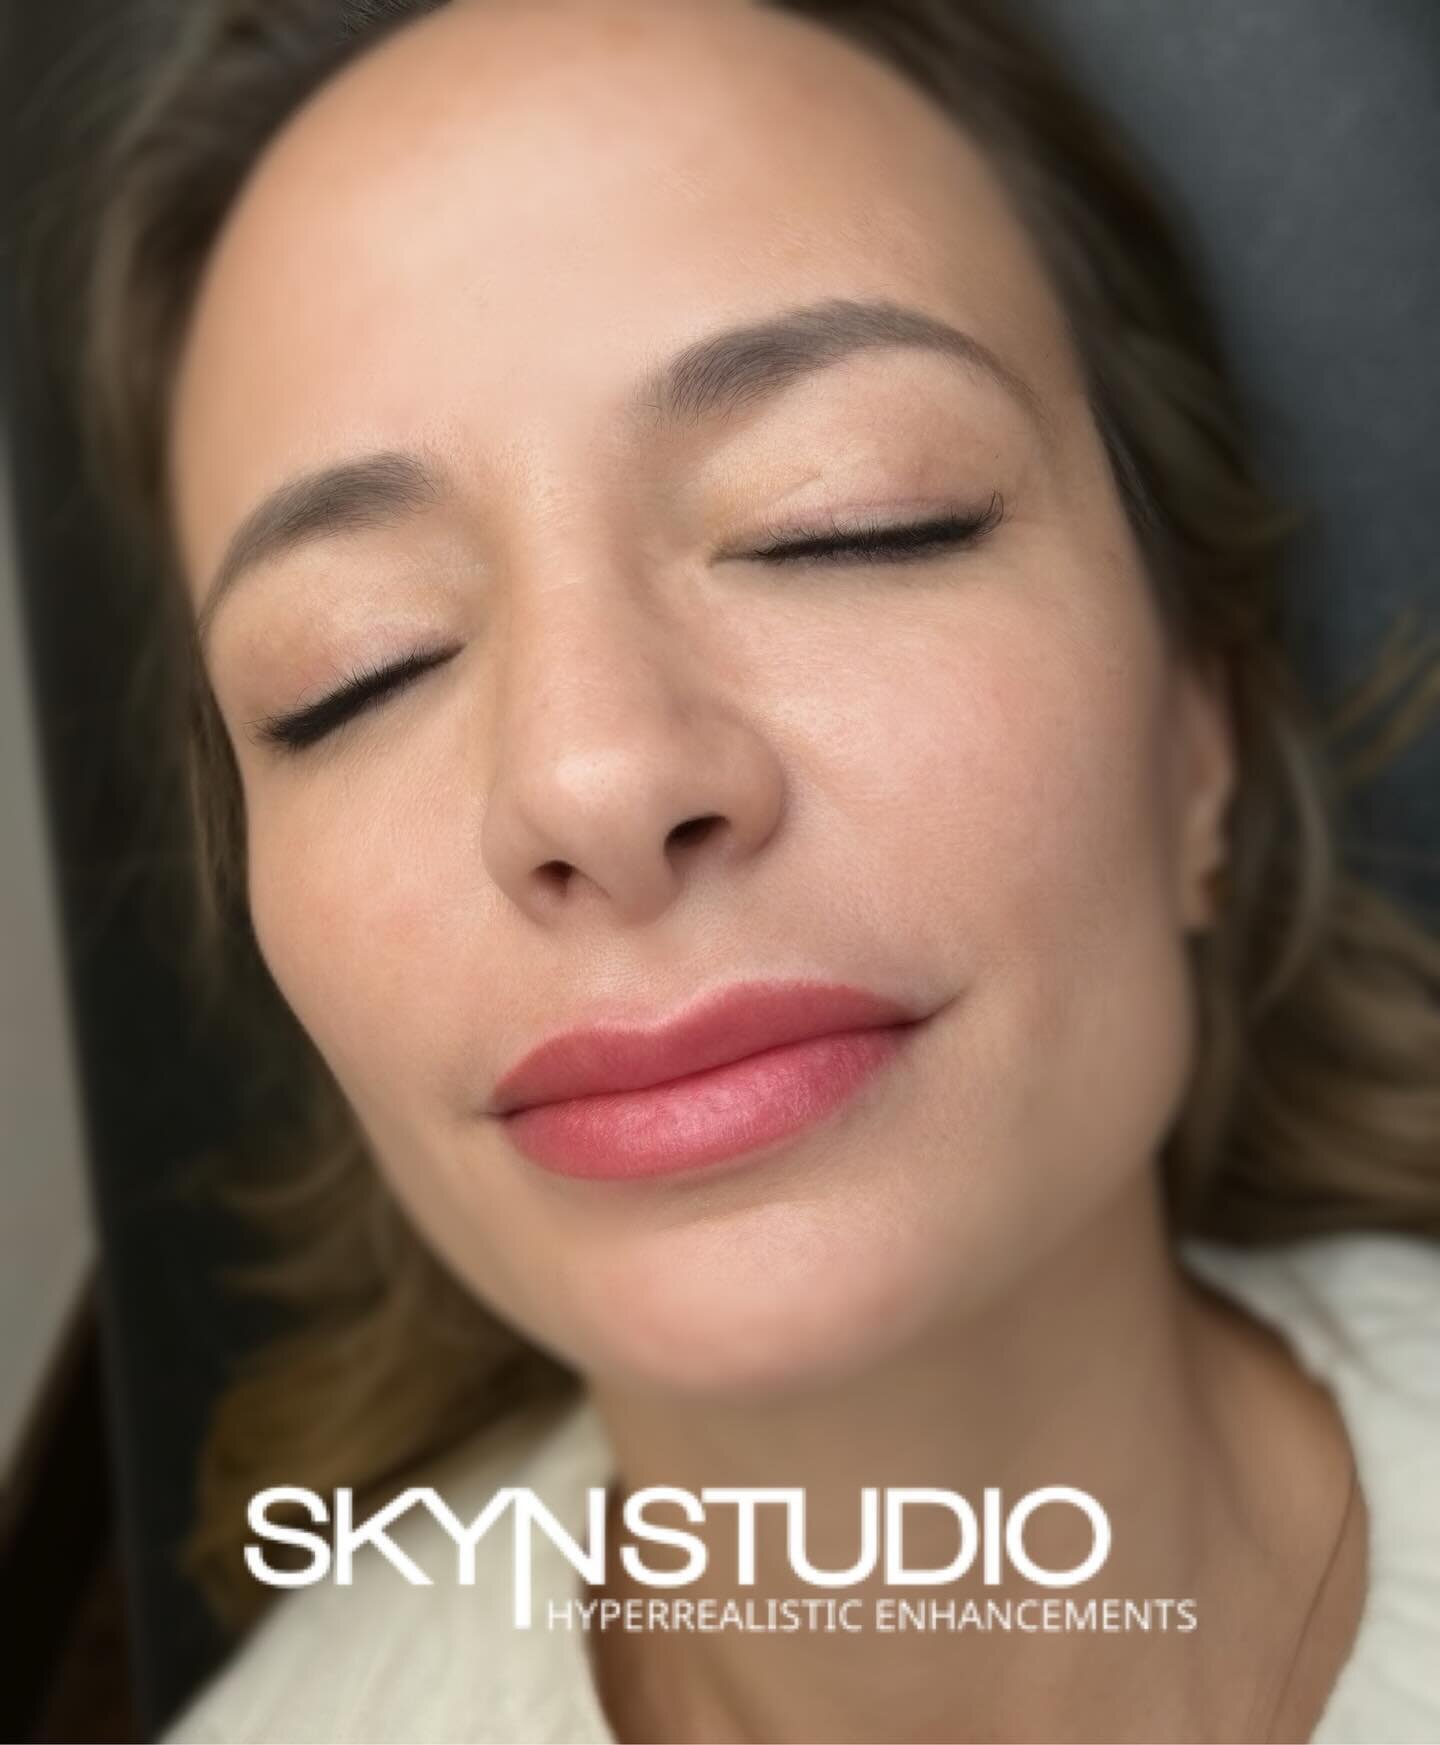 💋 Elevate Your Smile with Lip Blushing at SKYN STUDIO 💋
We&rsquo;re transforming smiles with our premium Lip Blushing service. Perfect your pout with a natural-looking tint that enhances your lips&rsquo; shape and color, lasting through every momen